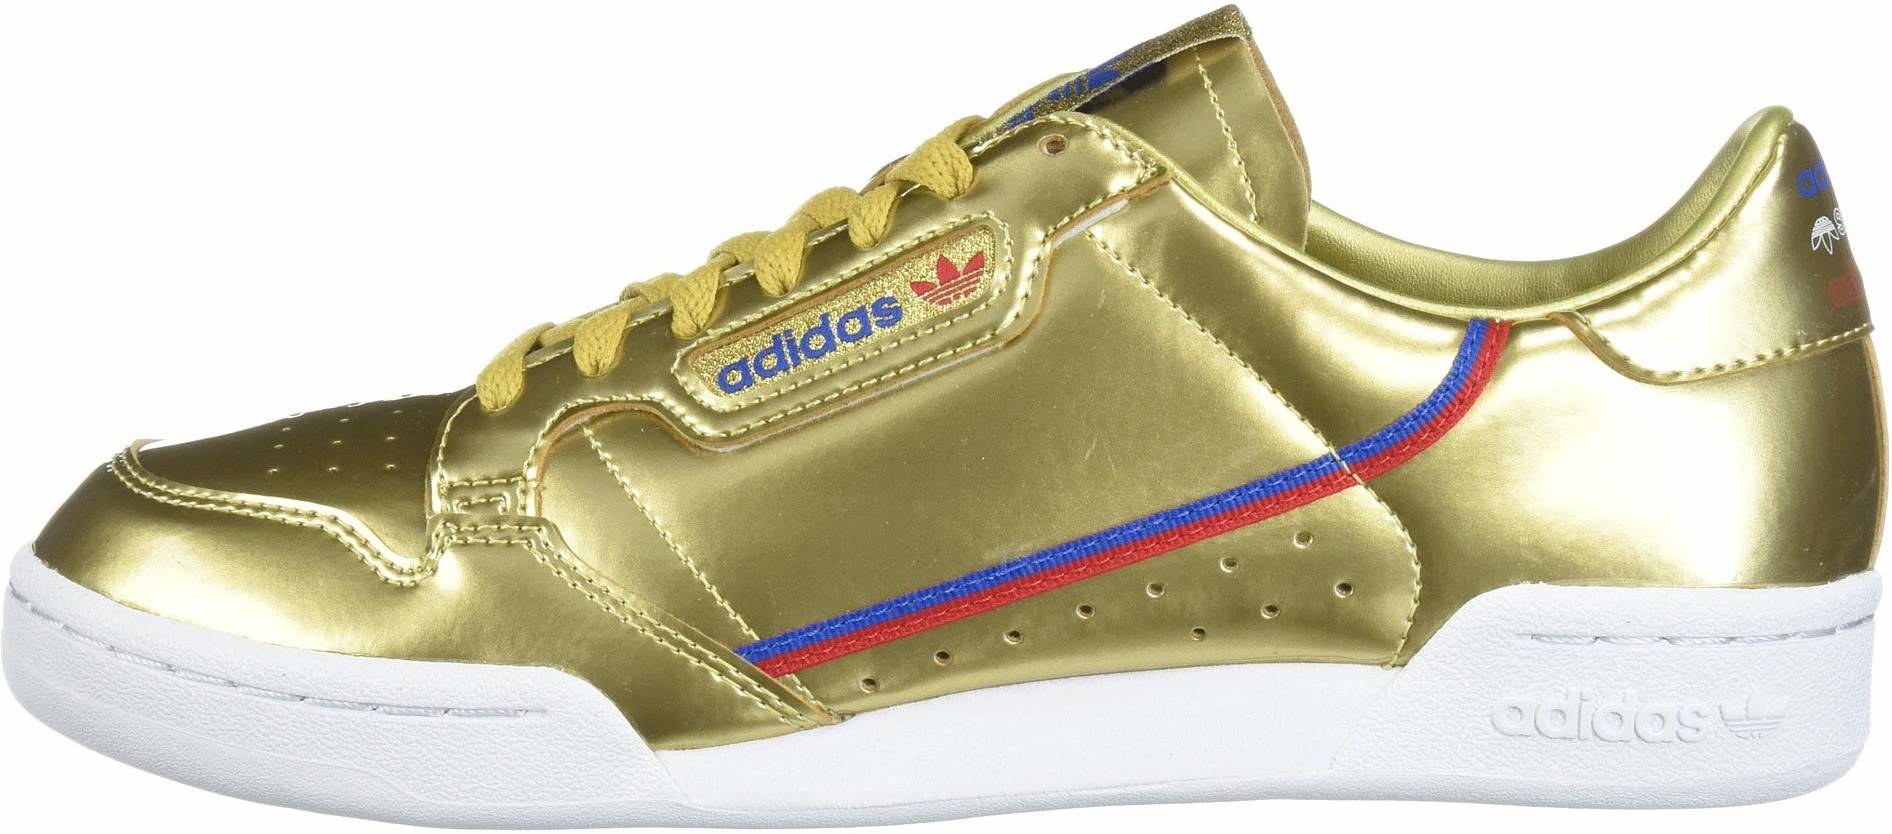 white adidas shoes with gold